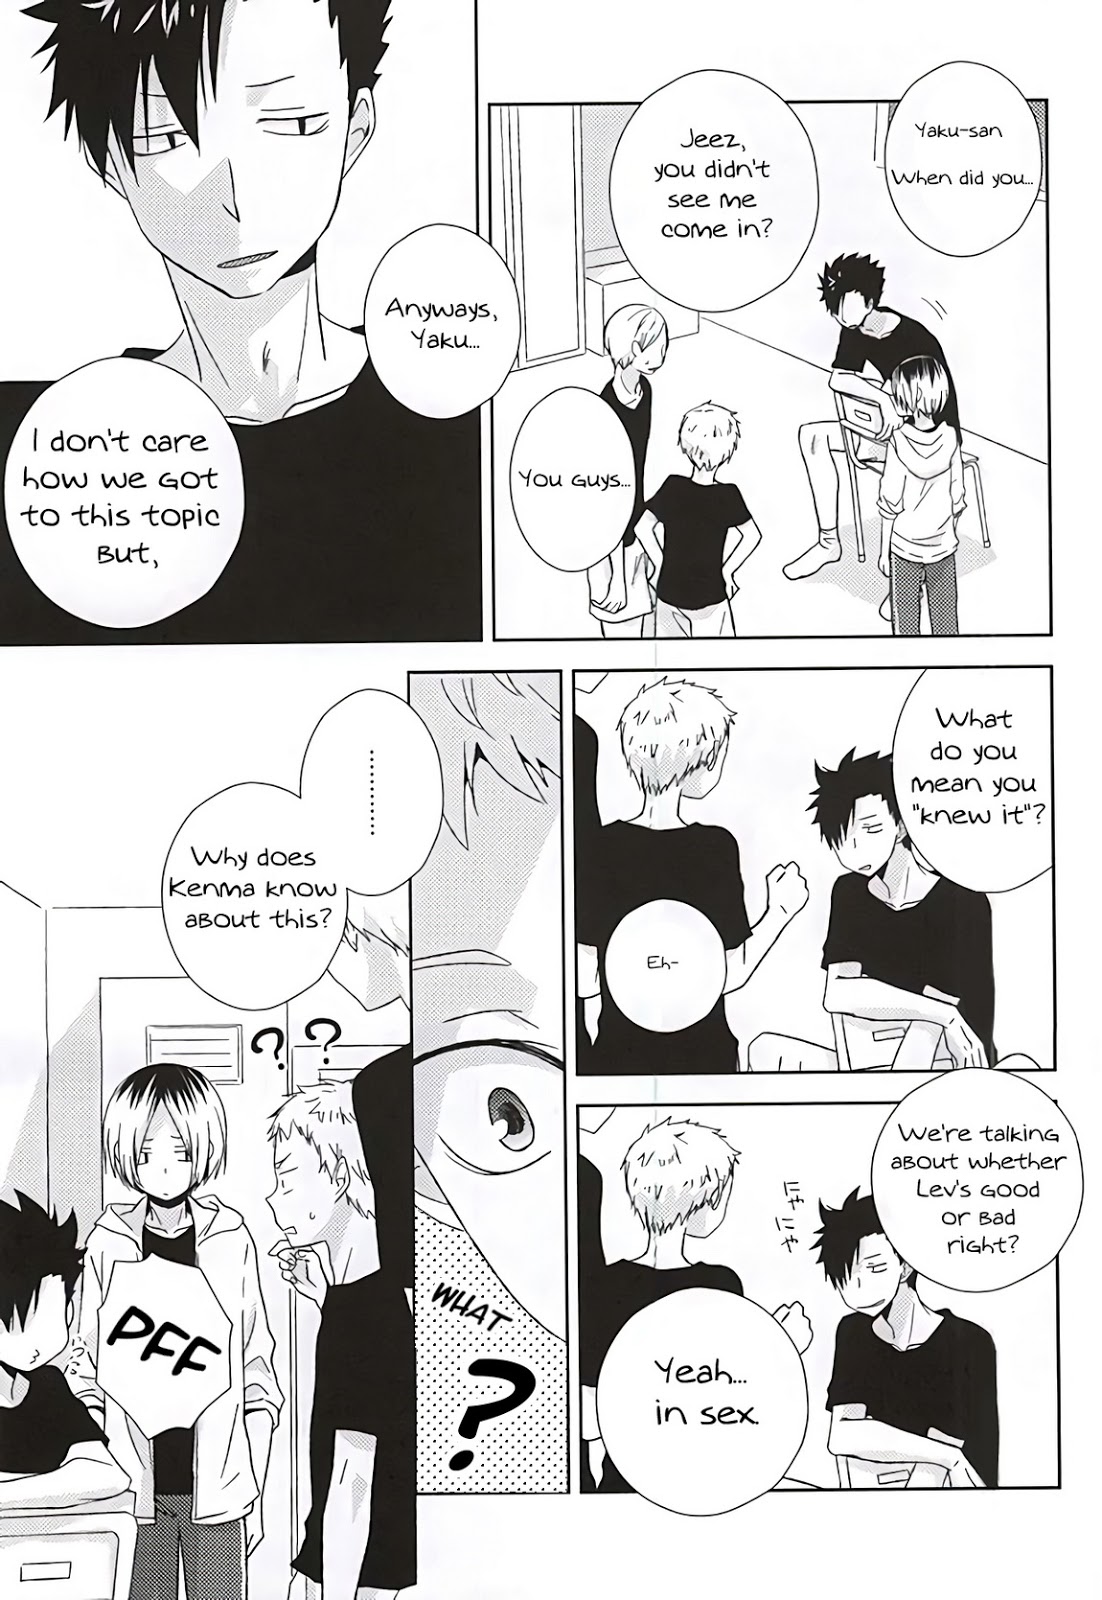 (SPARK10) [MOBRIS (Tomoharu)] HOWtoPLAY tutrial (Haikyuu!!) [English] [Homies over Hoes] page 4 full